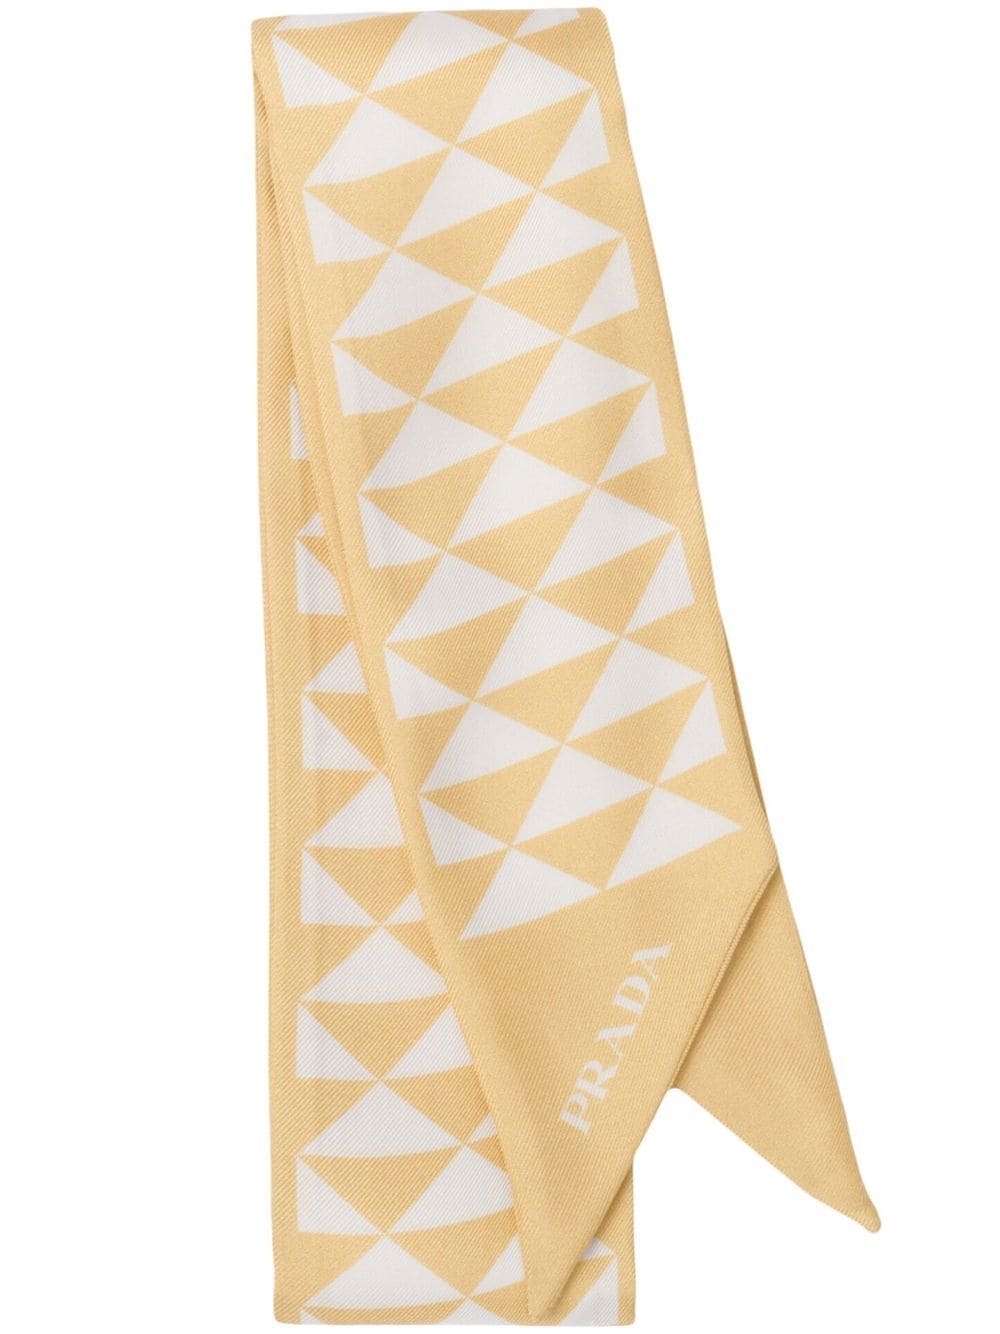 Prada Patterned Twill Scarf In White Yellow